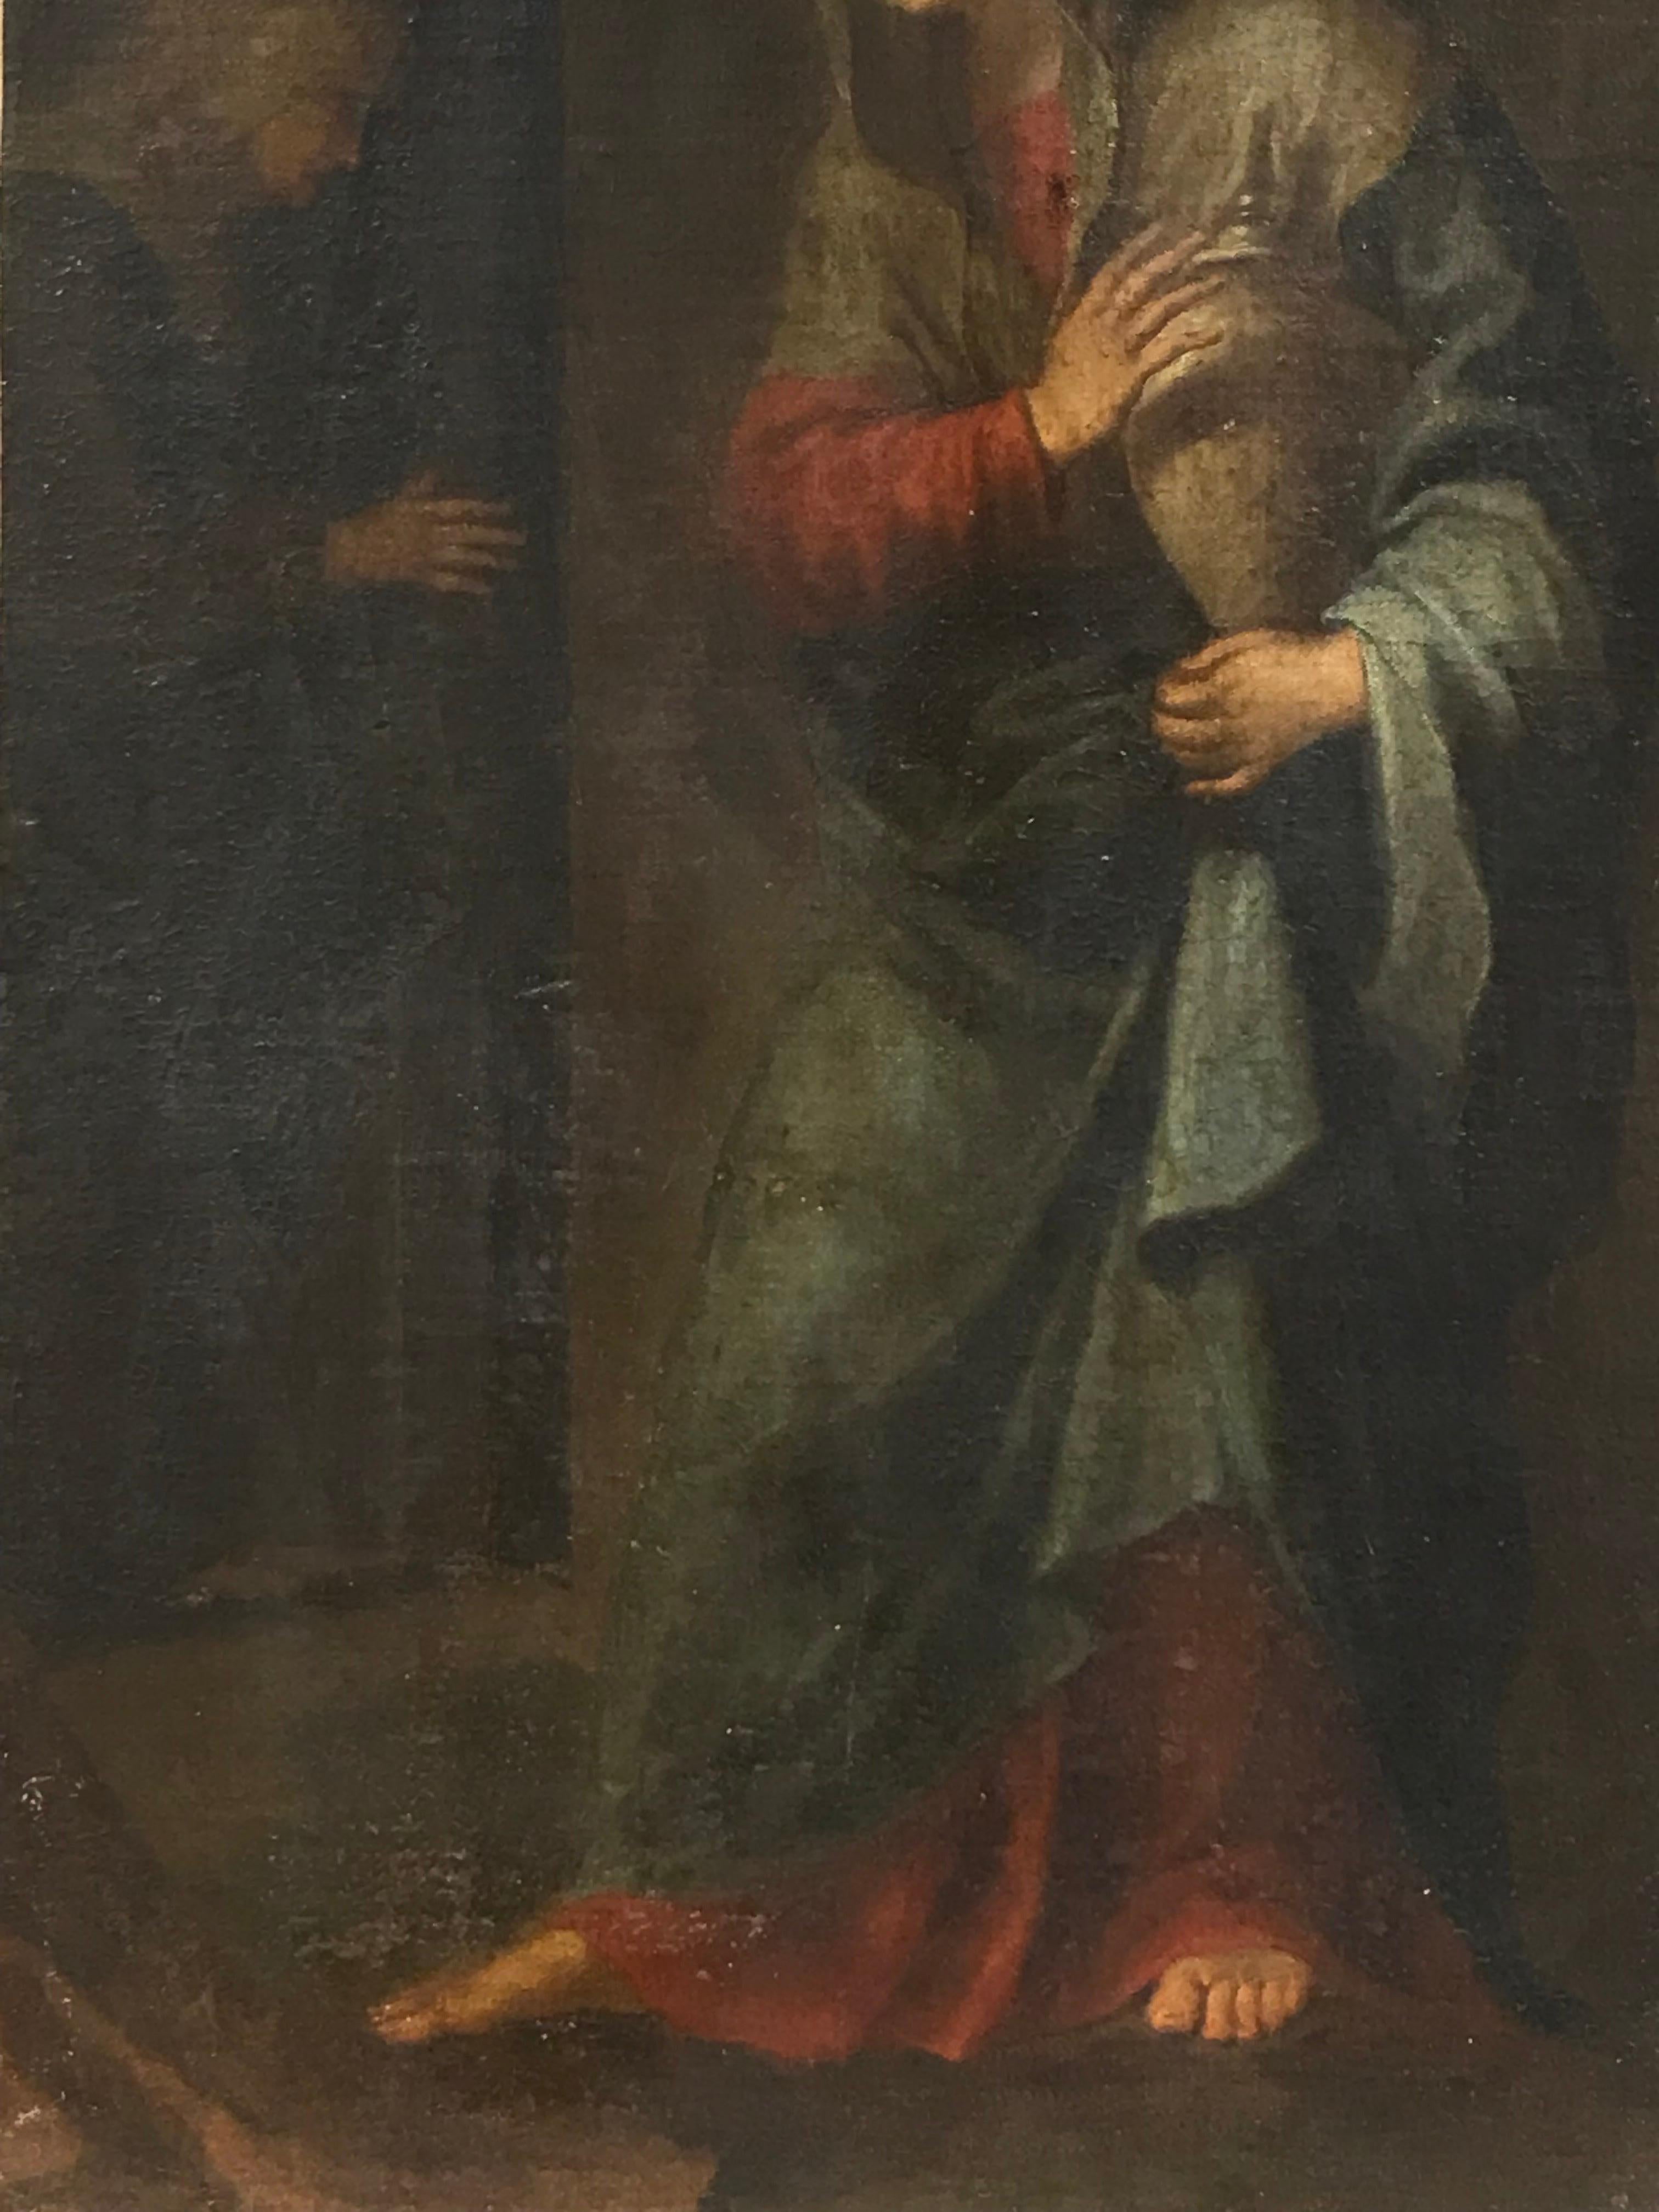 Artist/ School: Italian School, 17th century

Title: Two figures in an interior, one holding an urn or jug. Possibly a Biblical narrative subject. 

Medium: oil painting on canvas, unframed

canvas: 29 x 18 inches

Provenance: private collection,